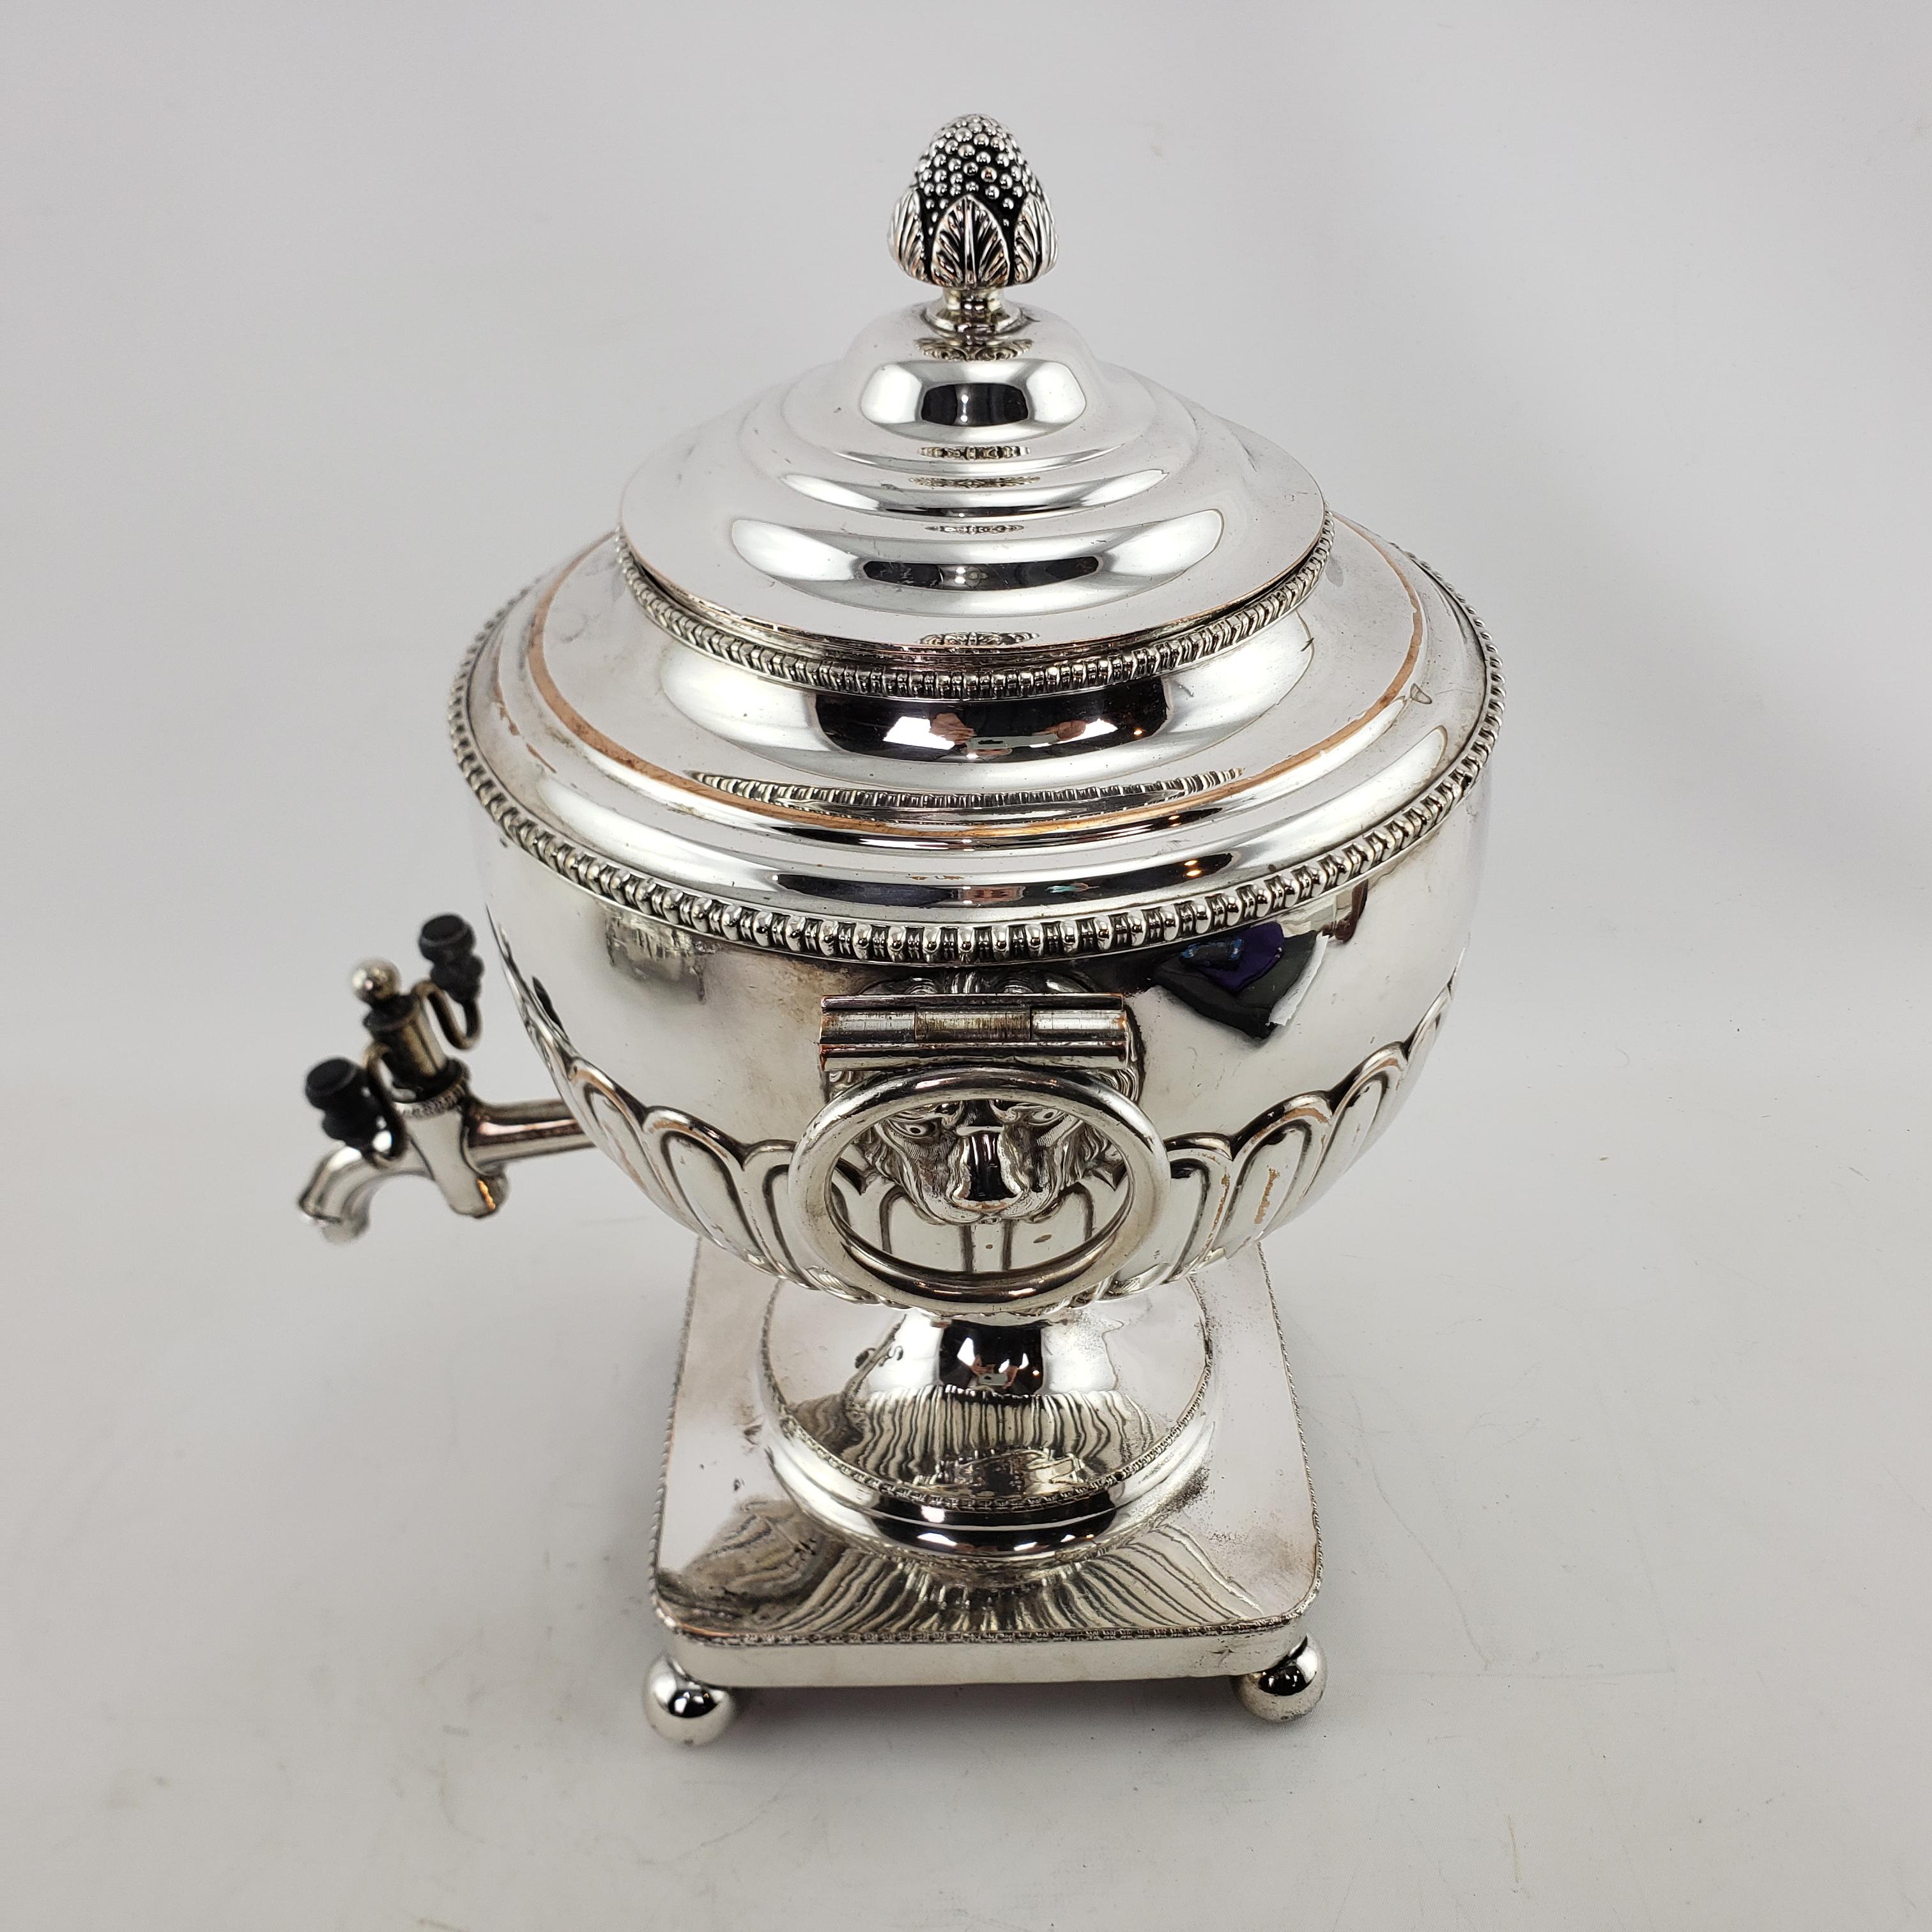 20th Century Antique Georgian Styled Silver Plated Tea or Hot Water Urn with Lion Mounts For Sale